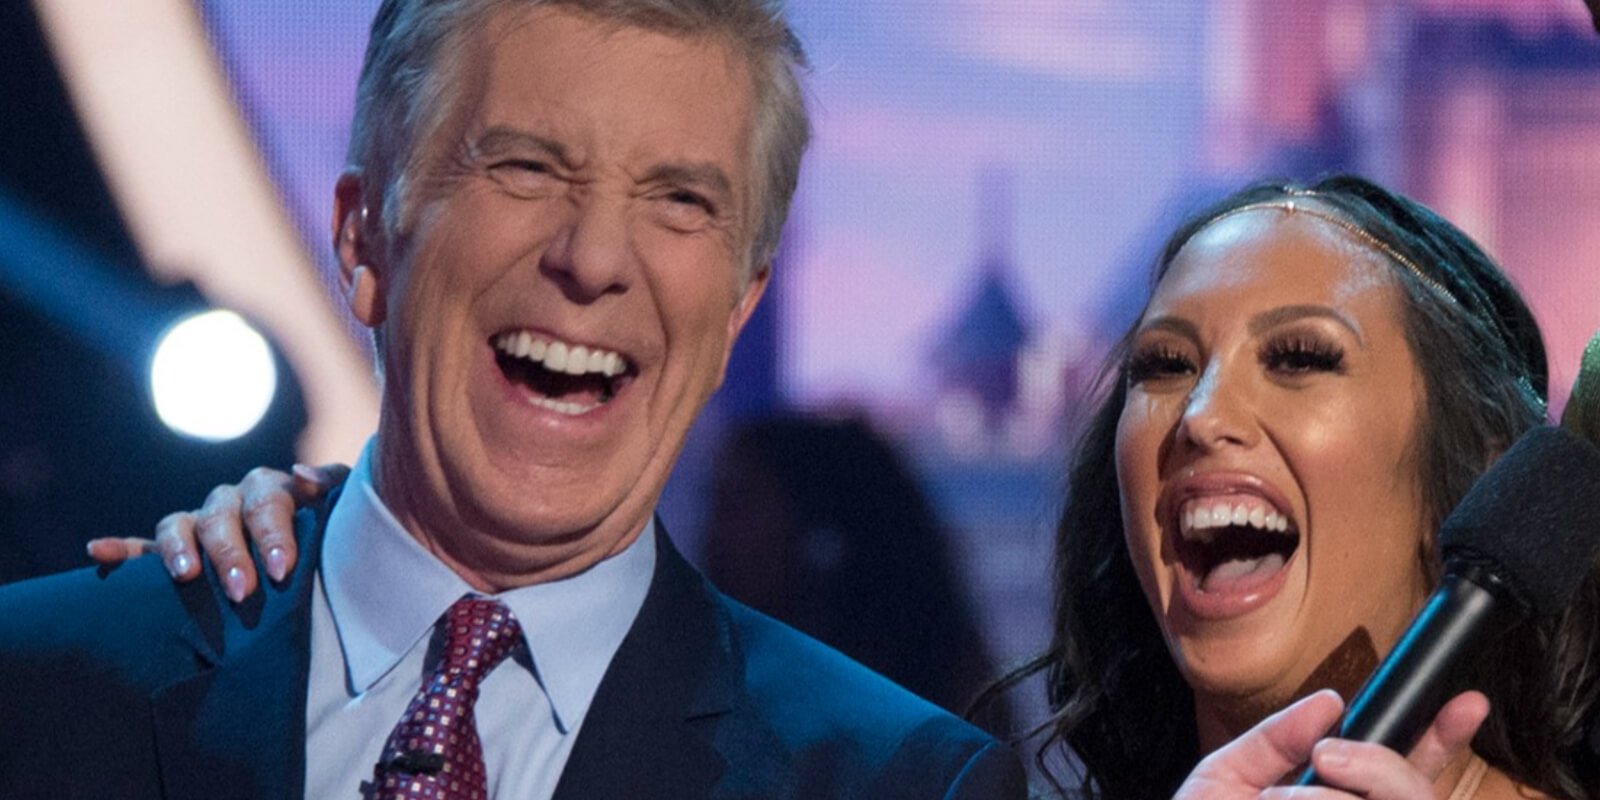 Former co-stars of 'Dancing with the Stars' Tom Bergeron and Cheryl Burke teased a new project on Instagram.